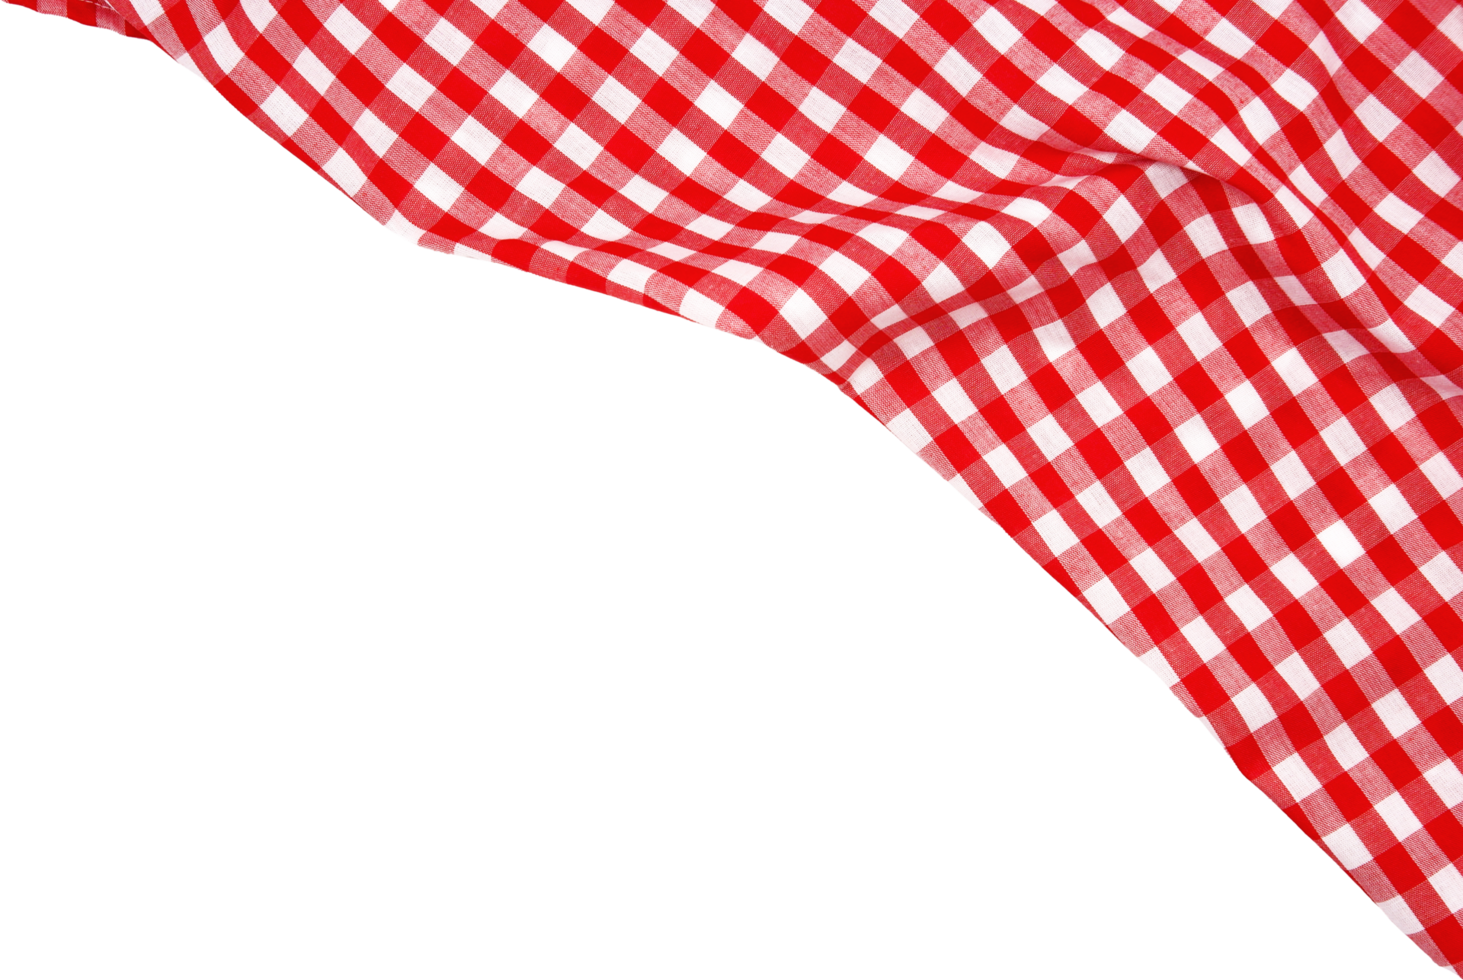 Wrinkled red gingham fabric png